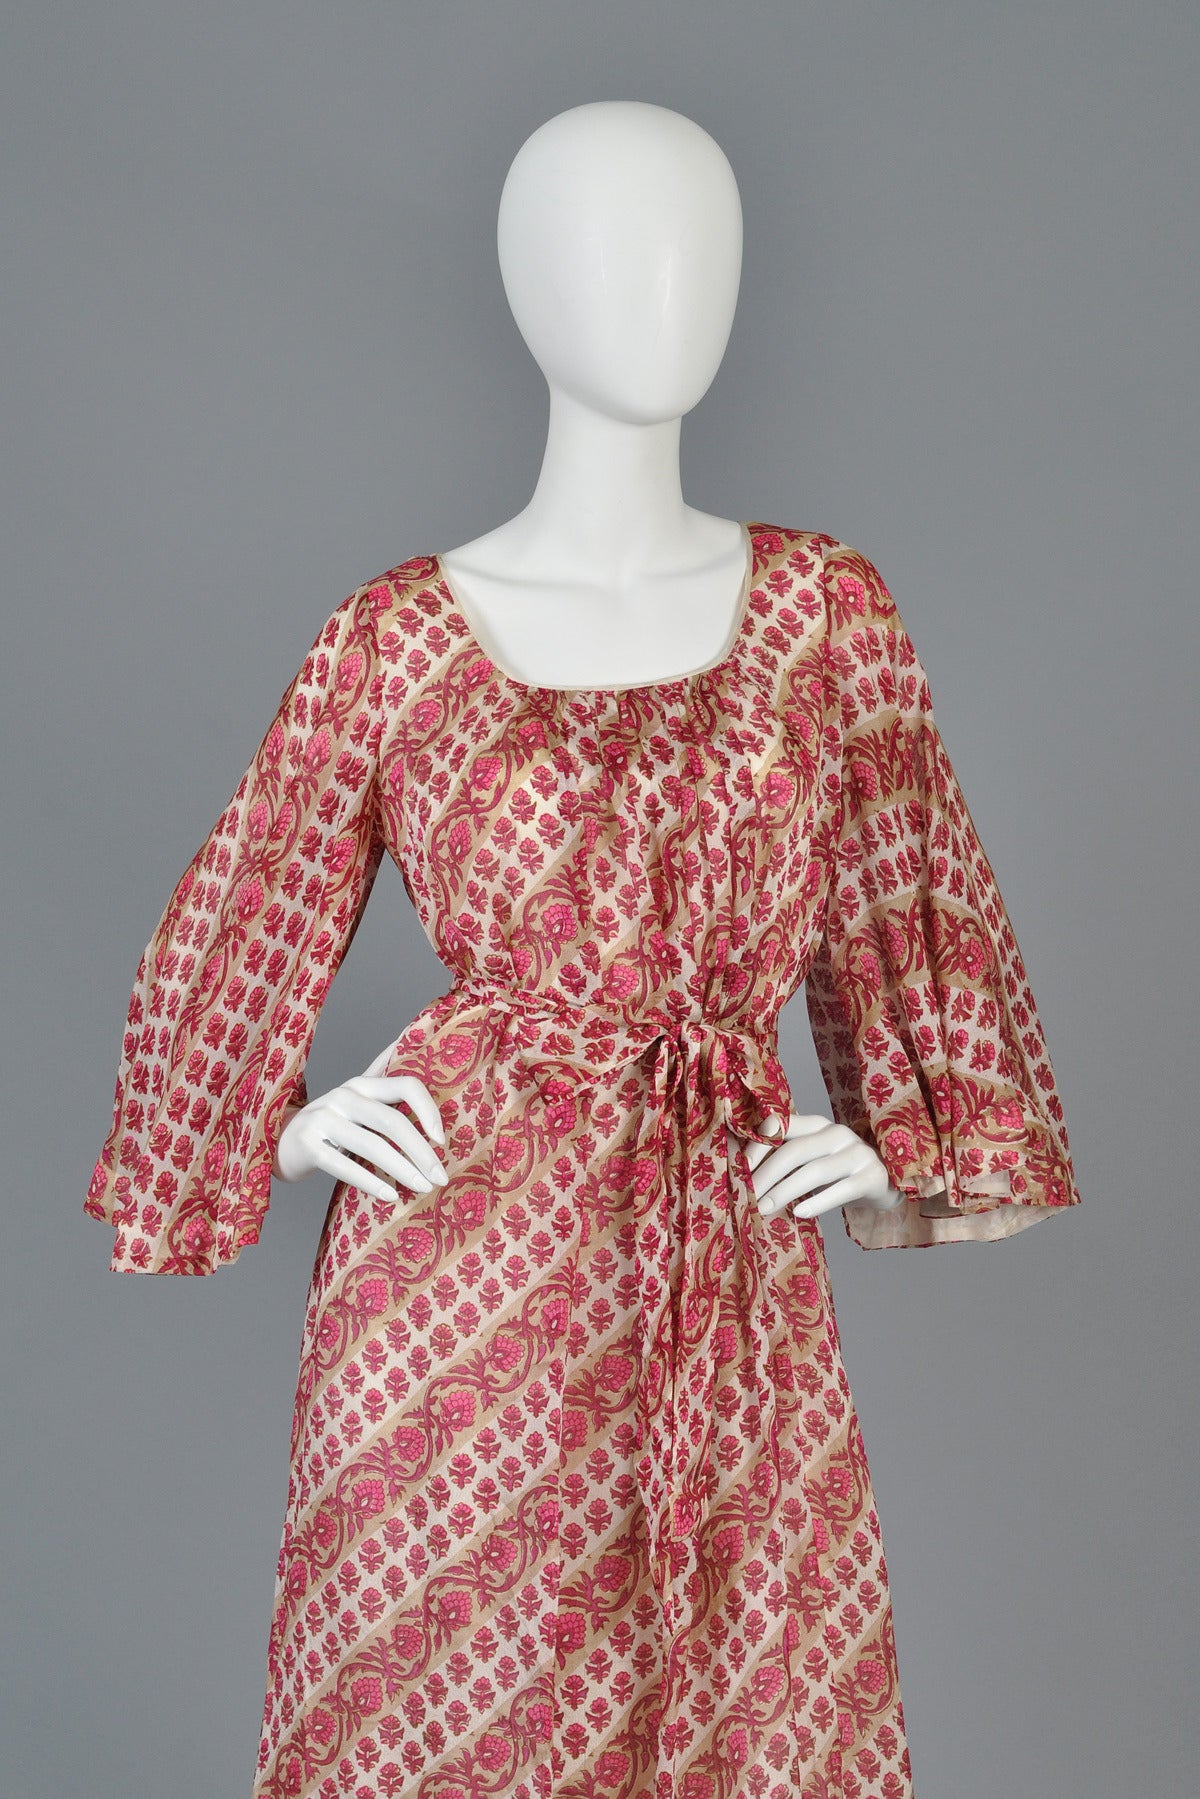 Women's 1970s Neiman Marcus Indian Silk Maxi Dress with Bell Sleeves